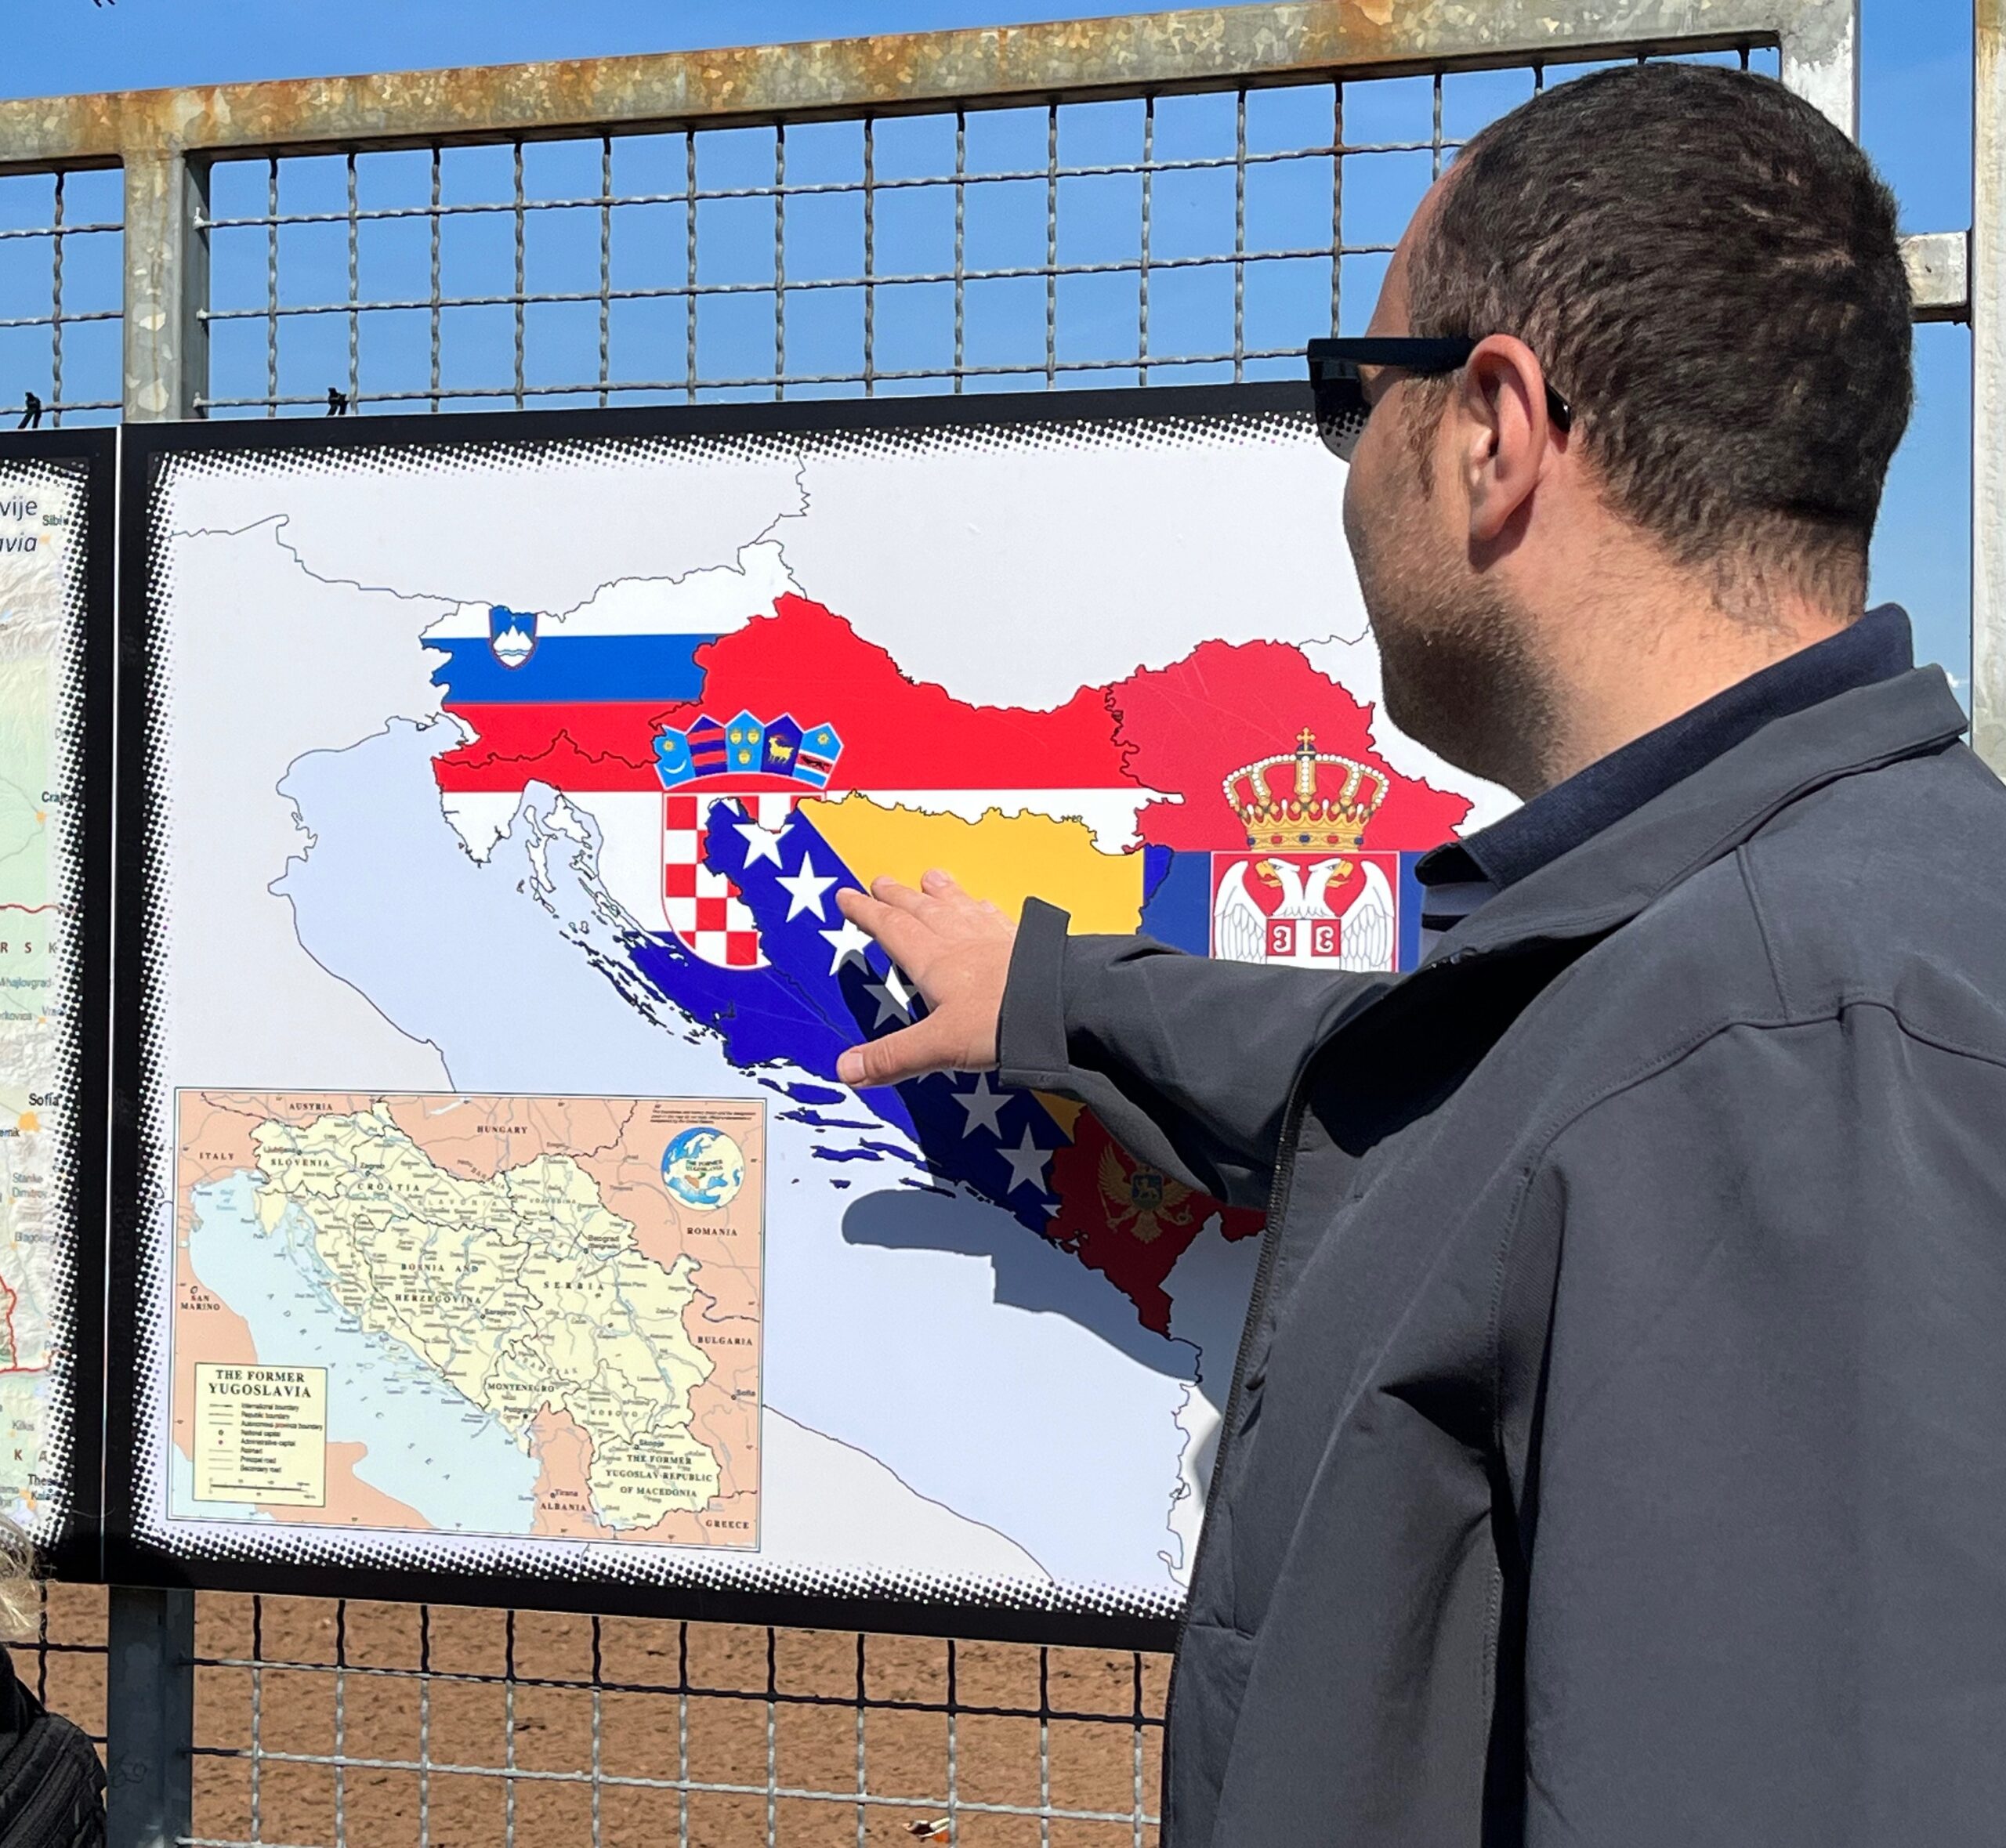 Aldin is pictured in a blue jacket and sunglasses, pointing to a map of the Sarajevo war tunnel in the sunshine